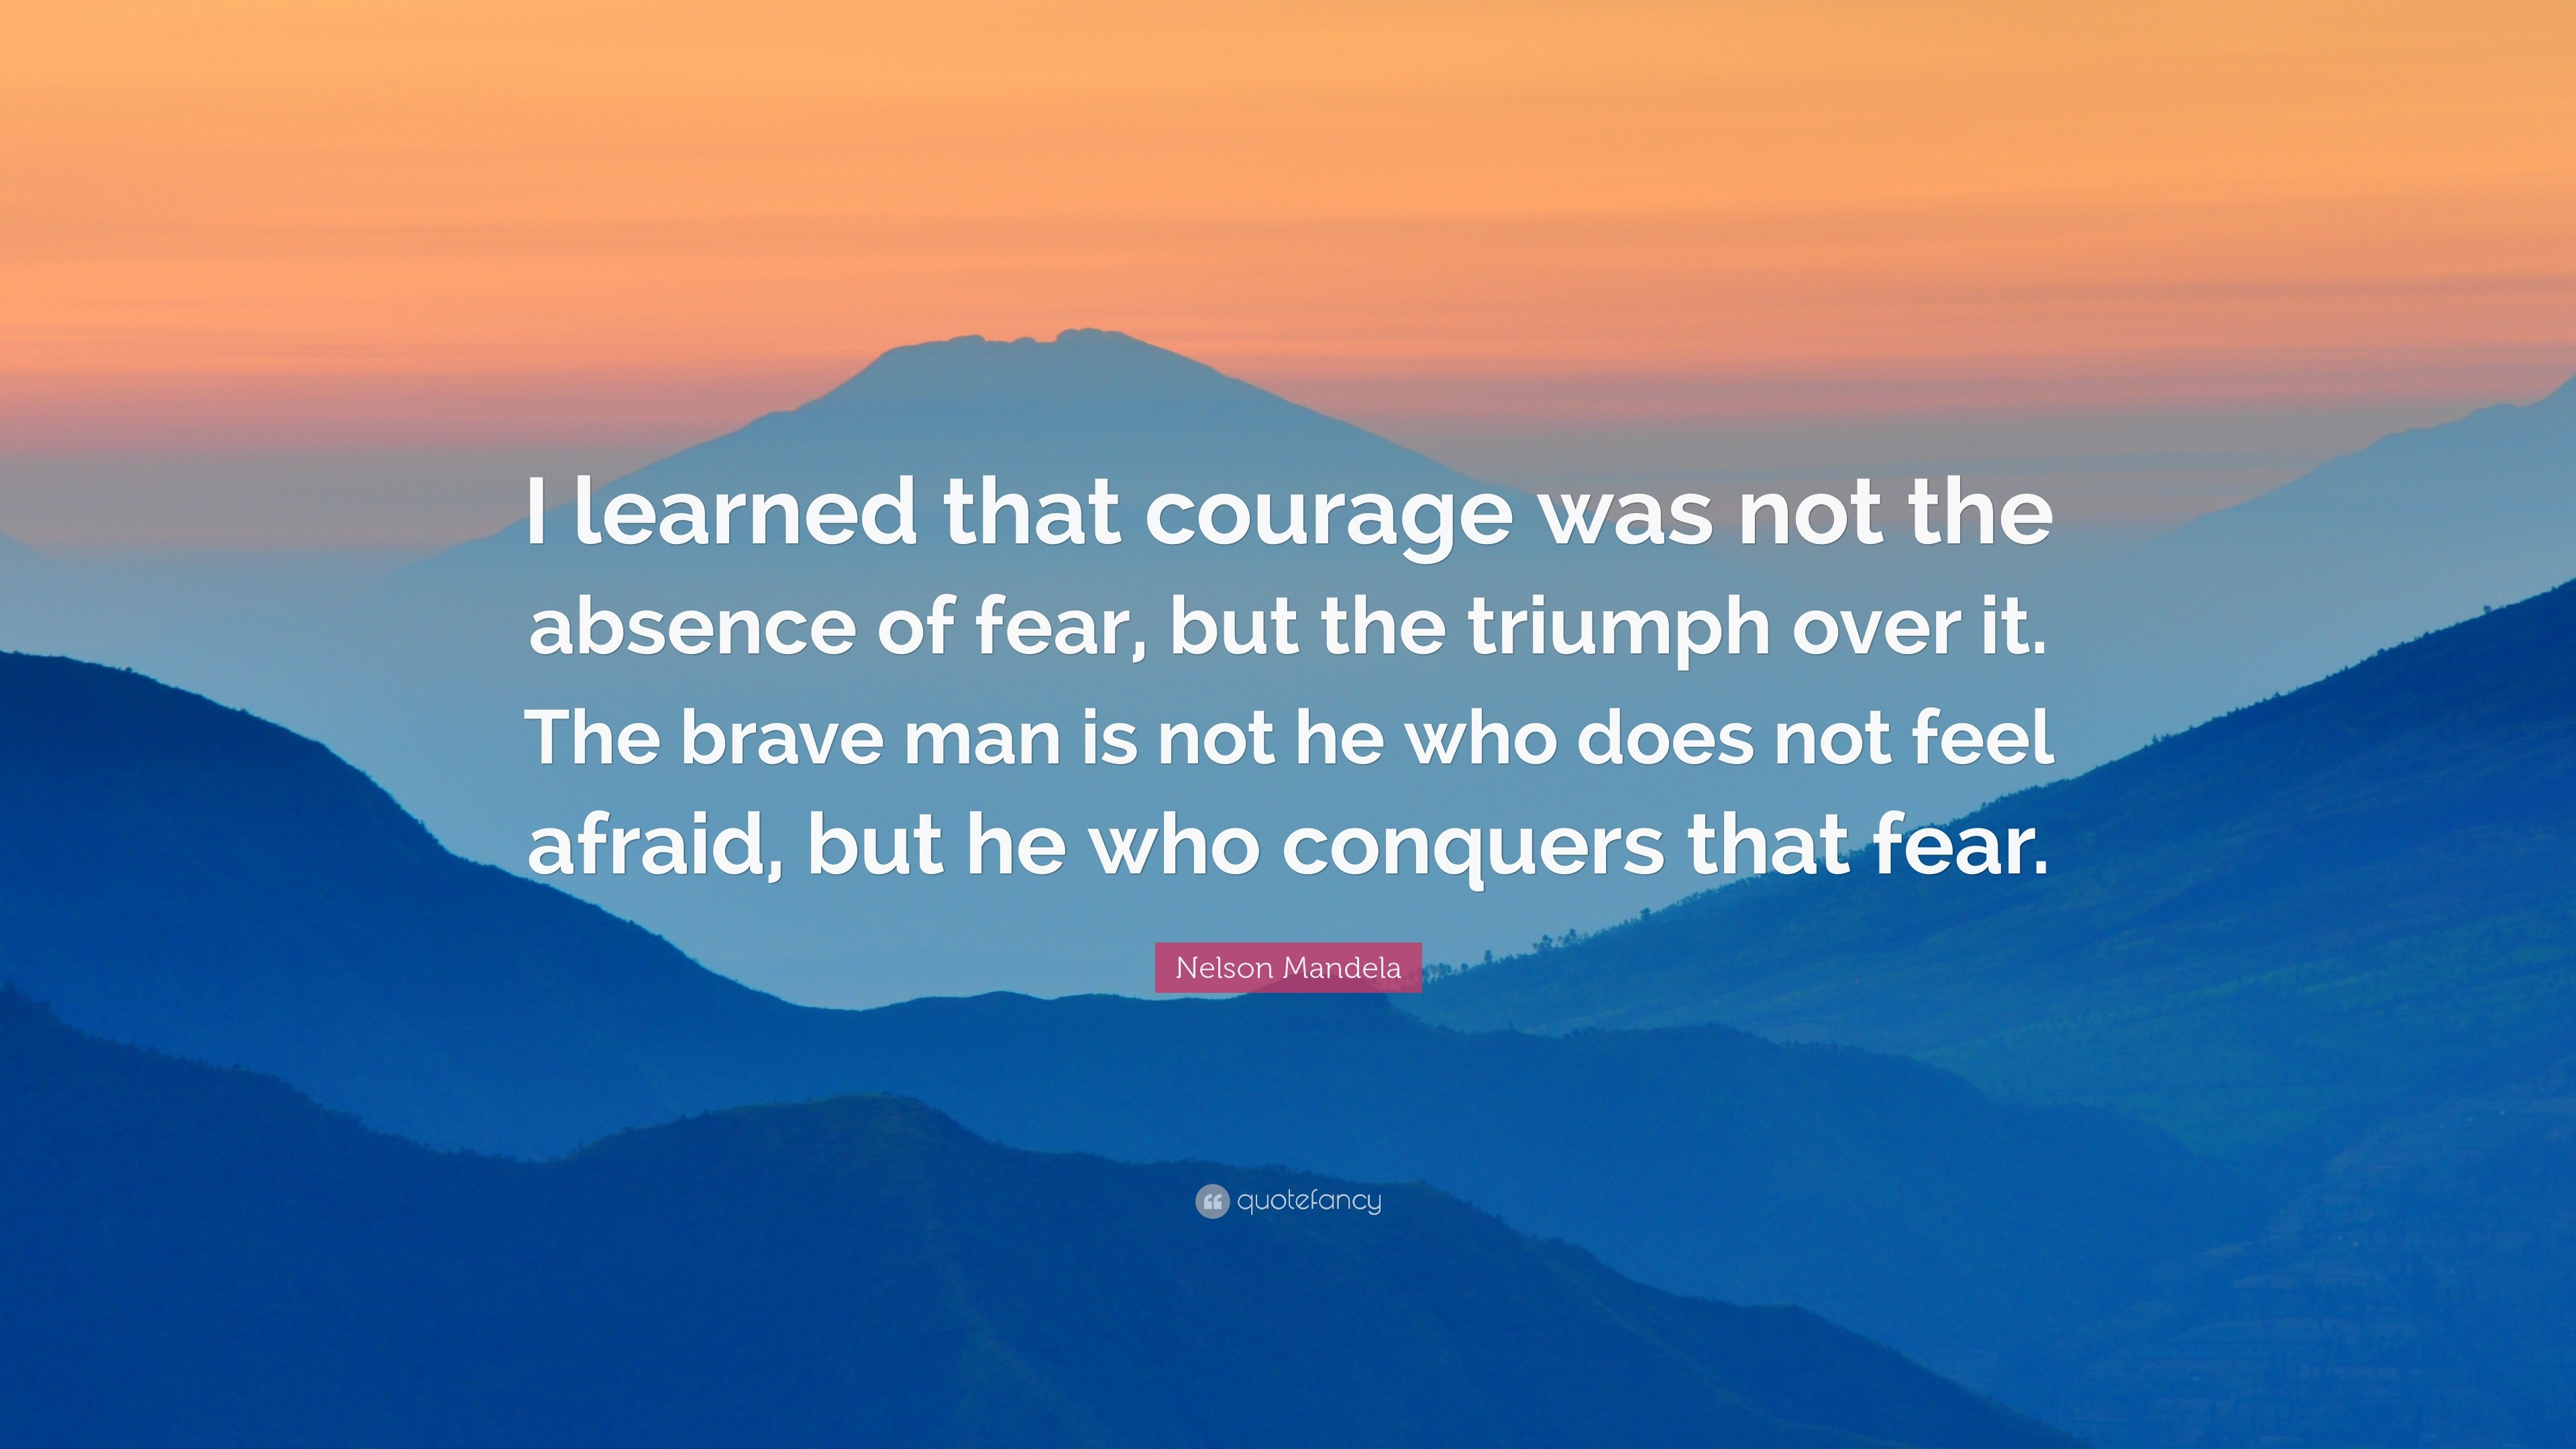 essay on courage is not the absence of fear